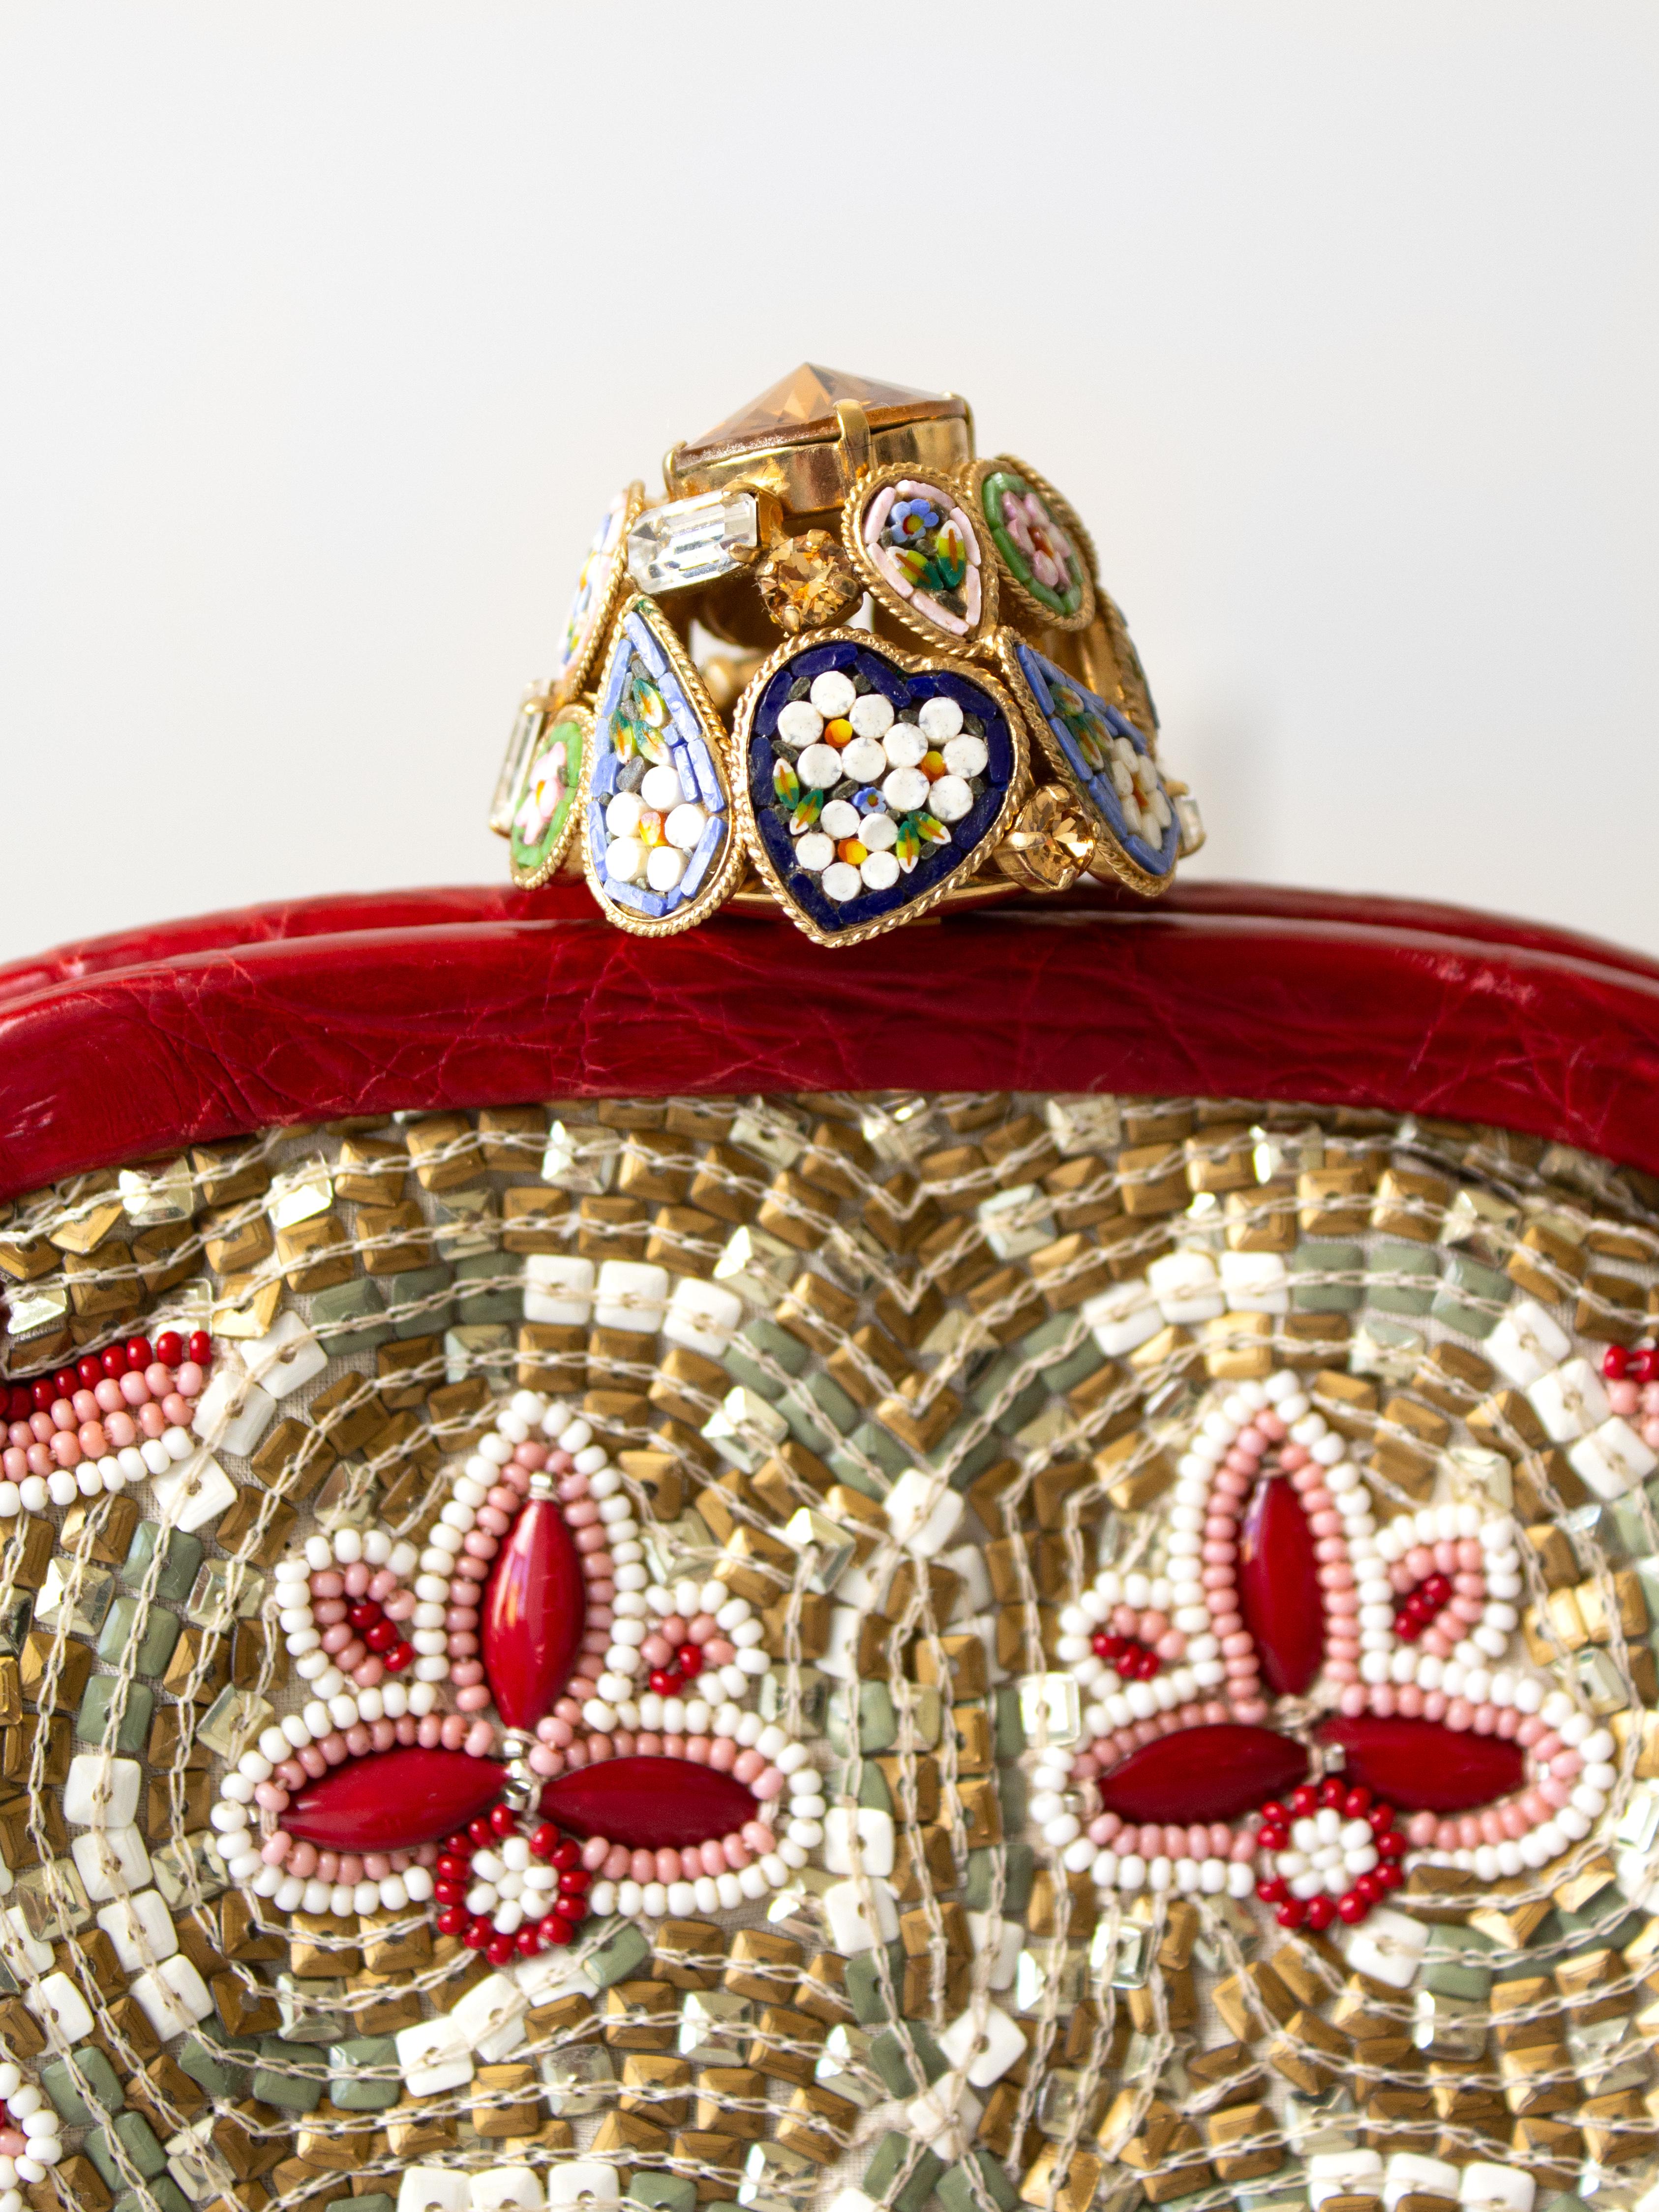 Dolce&Gabbana Fall/Winter 2013 Miss Dea Byzantine Mosaic Gold Red Clutch Bag In Good Condition For Sale In Jersey City, NJ